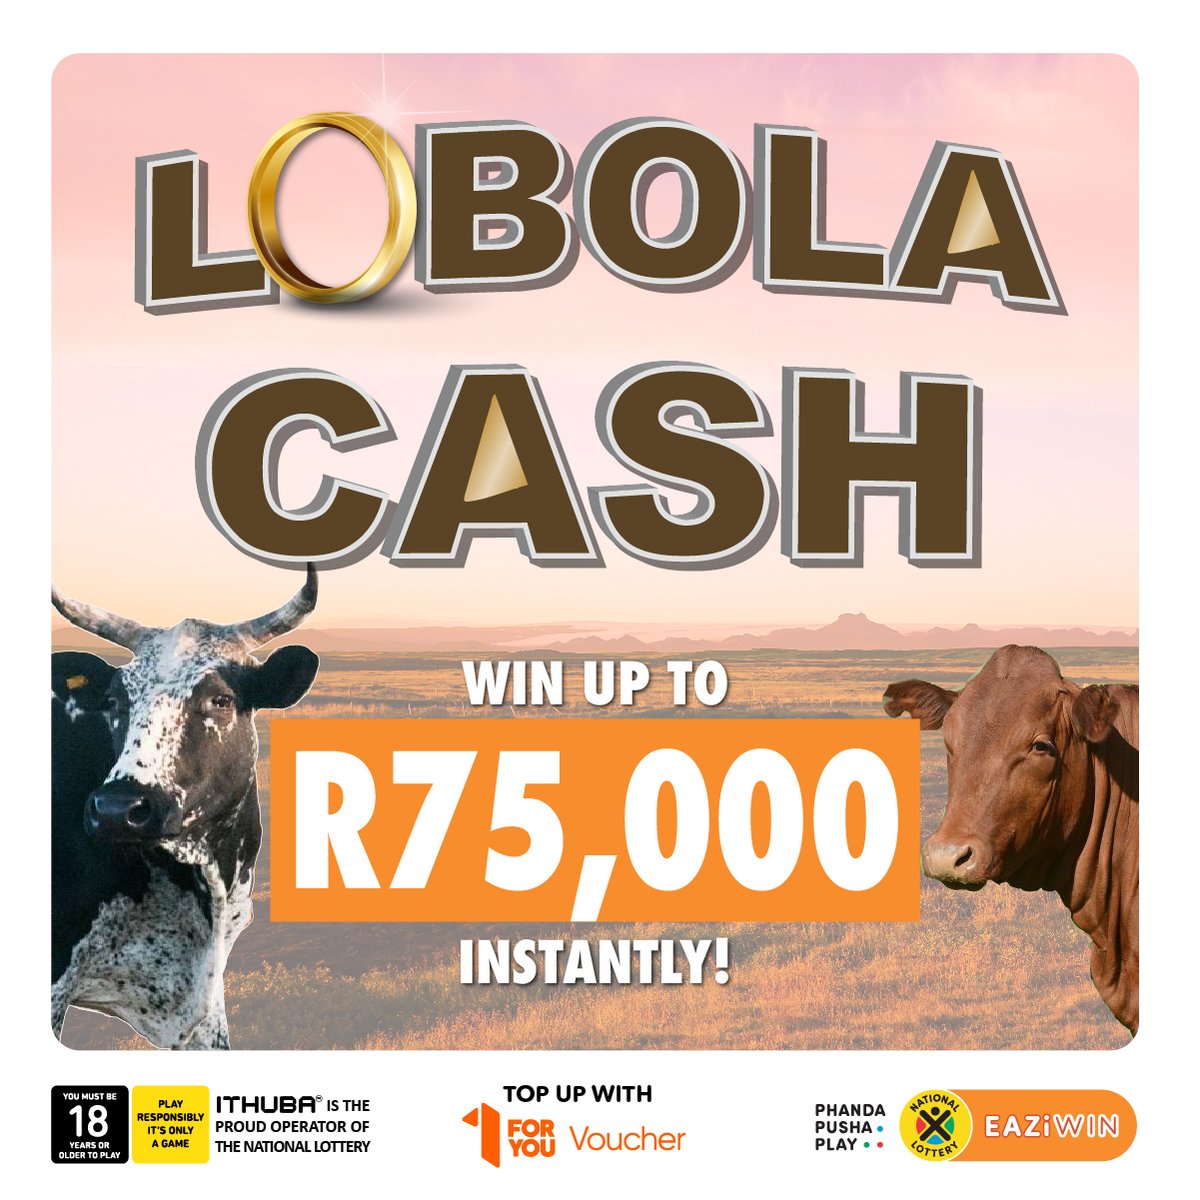 Say 'I do' to #EAZiWIN’s #LOBOLACASH and you could WIN up to R75,000 instantly!! Play NOW on nationallottery.co.za or the Mobile App!